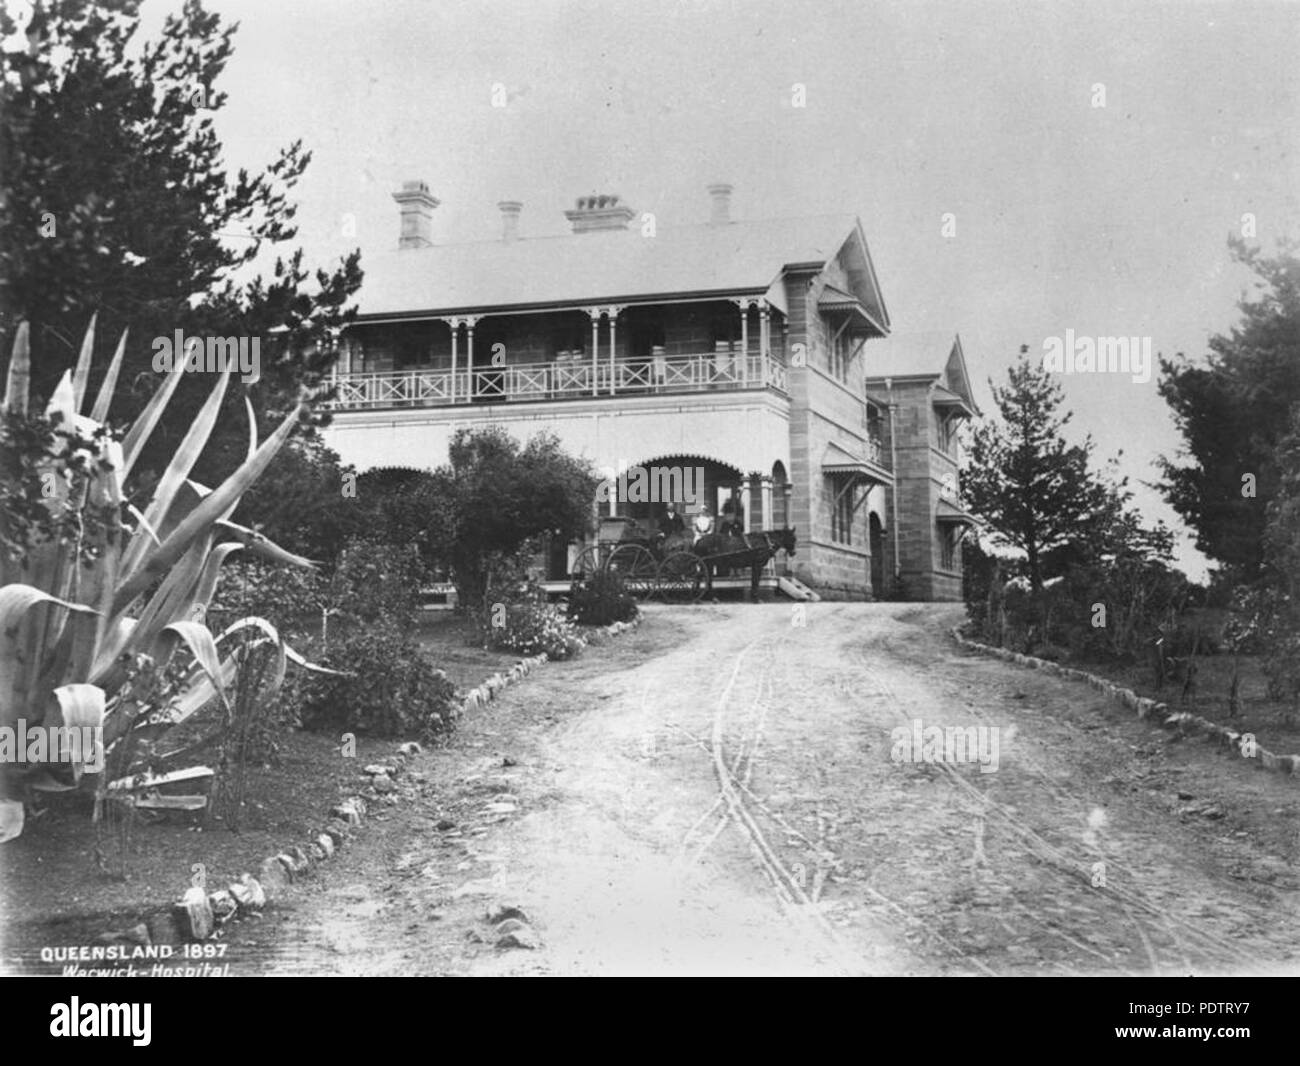 204 StateLibQld 1 108836 General Hospital as seen from the driveway, Warwick, ca. 1897 Stock Photo